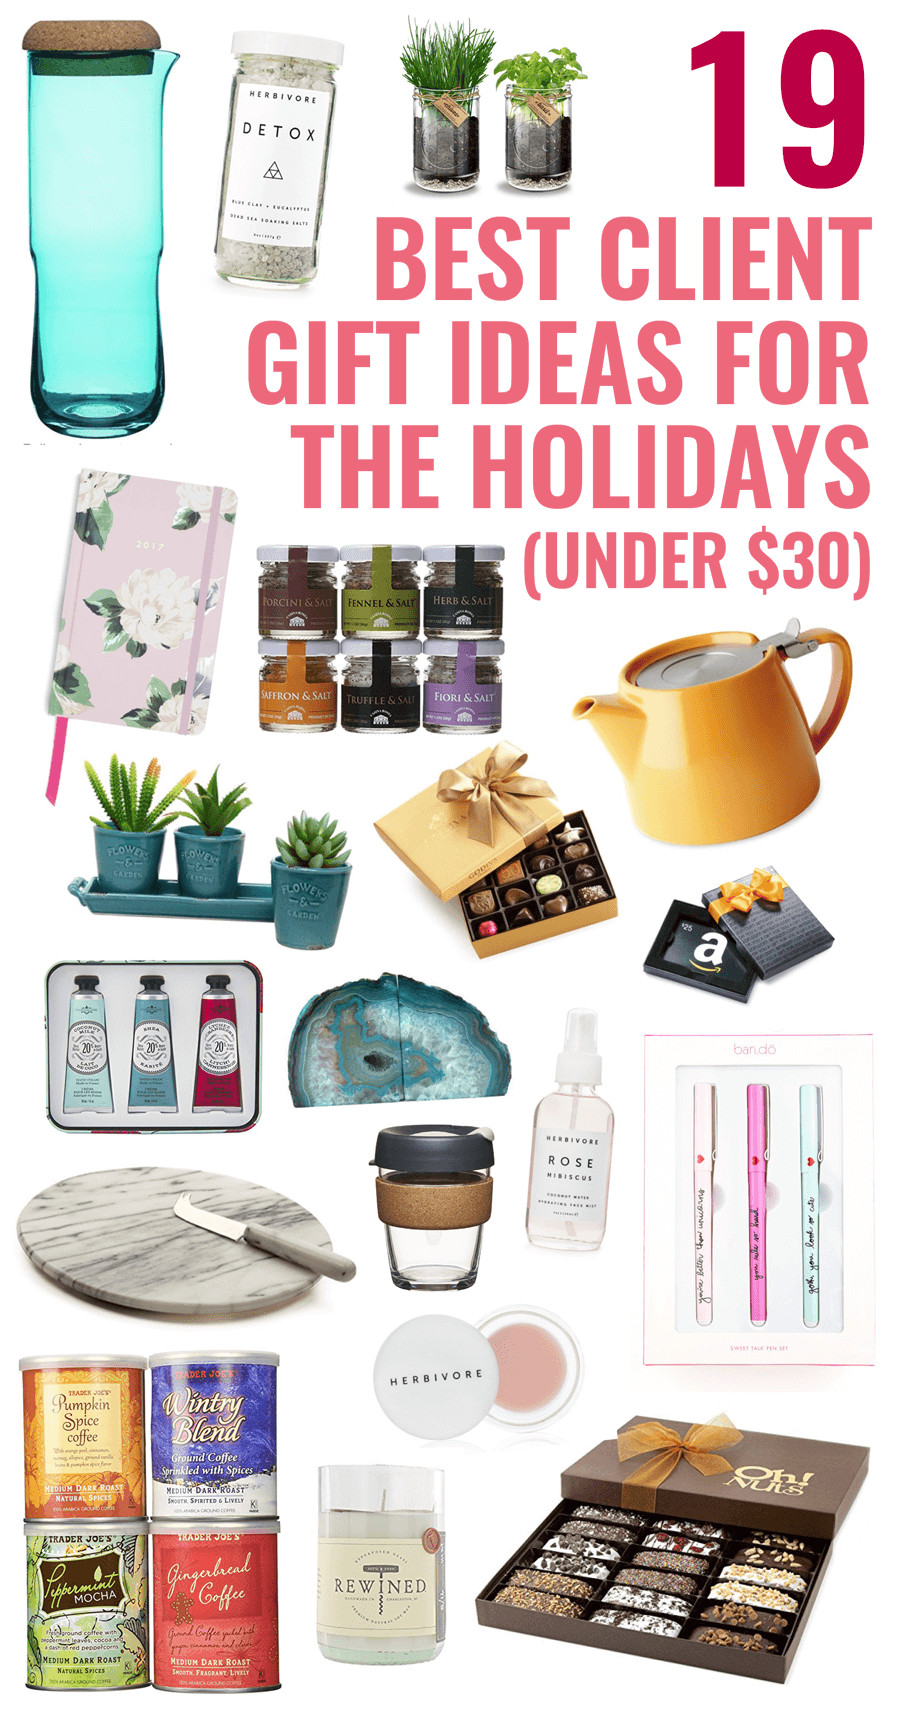 Best Holiday Gift Ideas
 19 Best Client Gift Ideas for the Holidays under $30